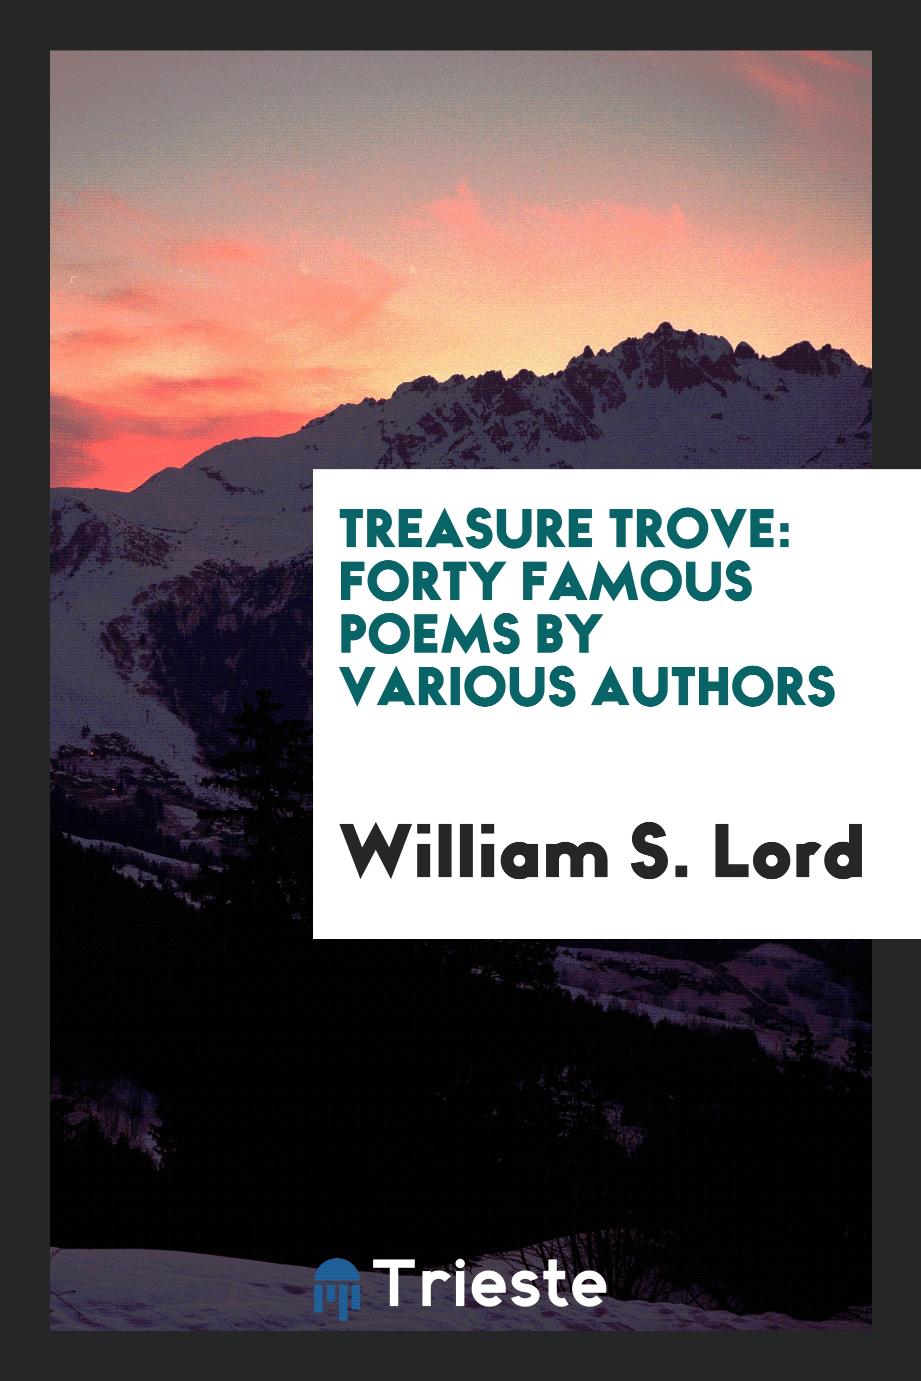 Treasure trove: forty famous poems by various authors